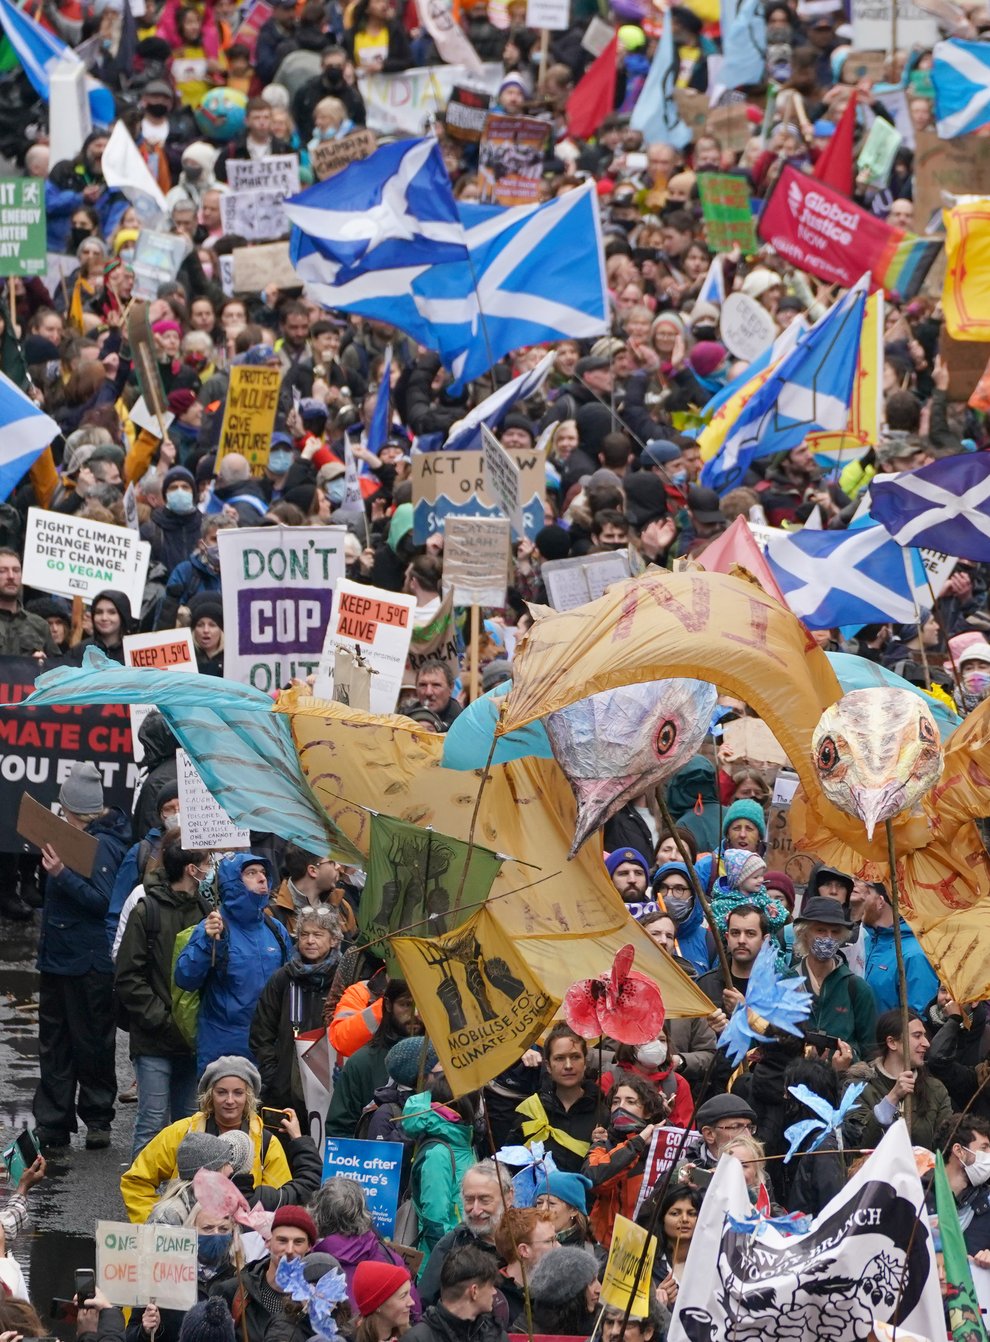 Protesters demand global climate justice (Andrew Milligan/PA)